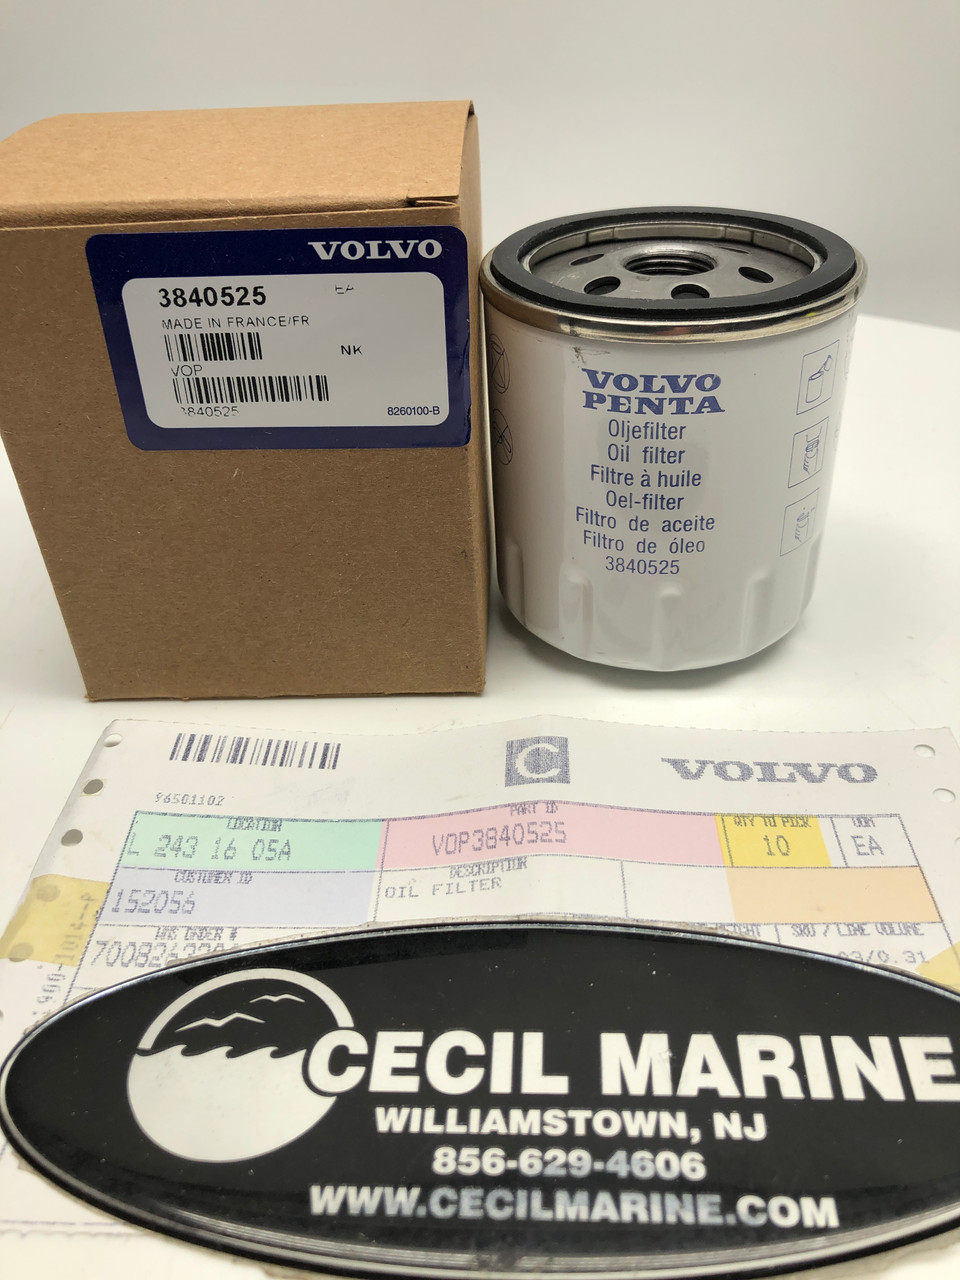 $23.99* GENUINE VOLVO no tax* OIL FILTER 3840525 *In Stock & Ready To Ship!